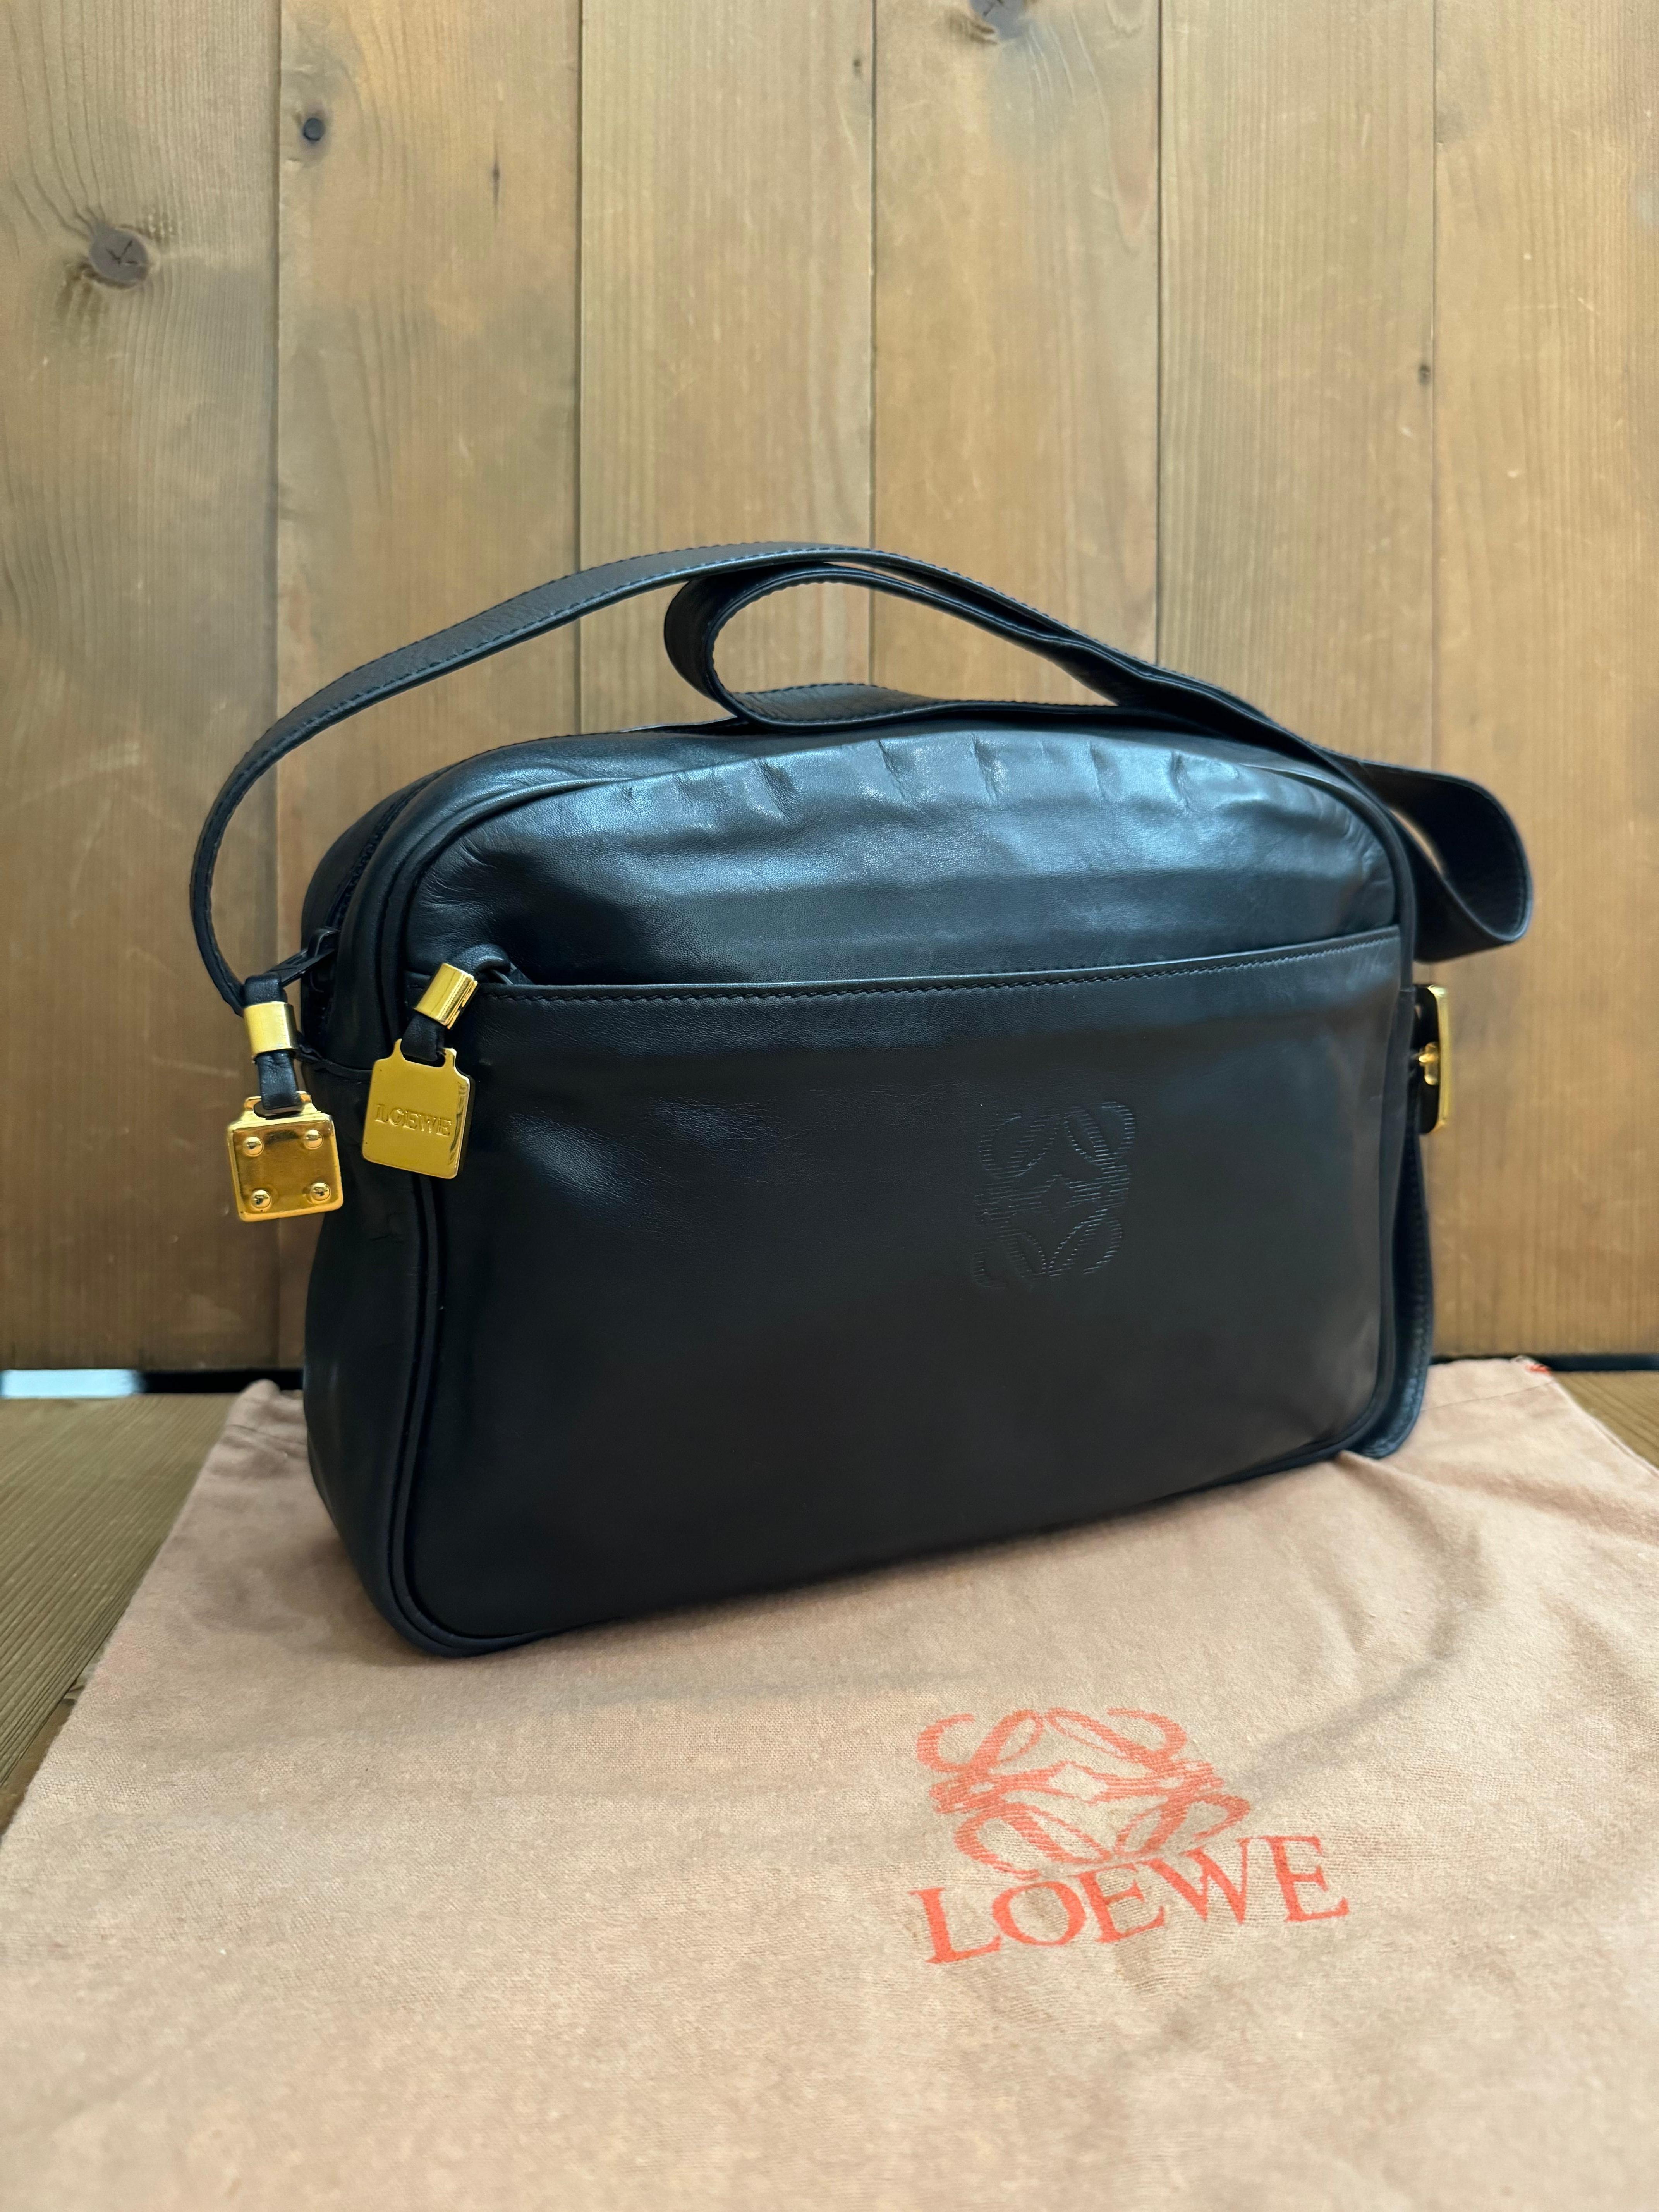 This vintage LOEWE Anagram camera bag is crafted of calfskin leather in black and gold toned hardware featuring an adjustable shoulder strap. Top zipper closure opens to a coated interior which has been professionally cleaned with stamps removed